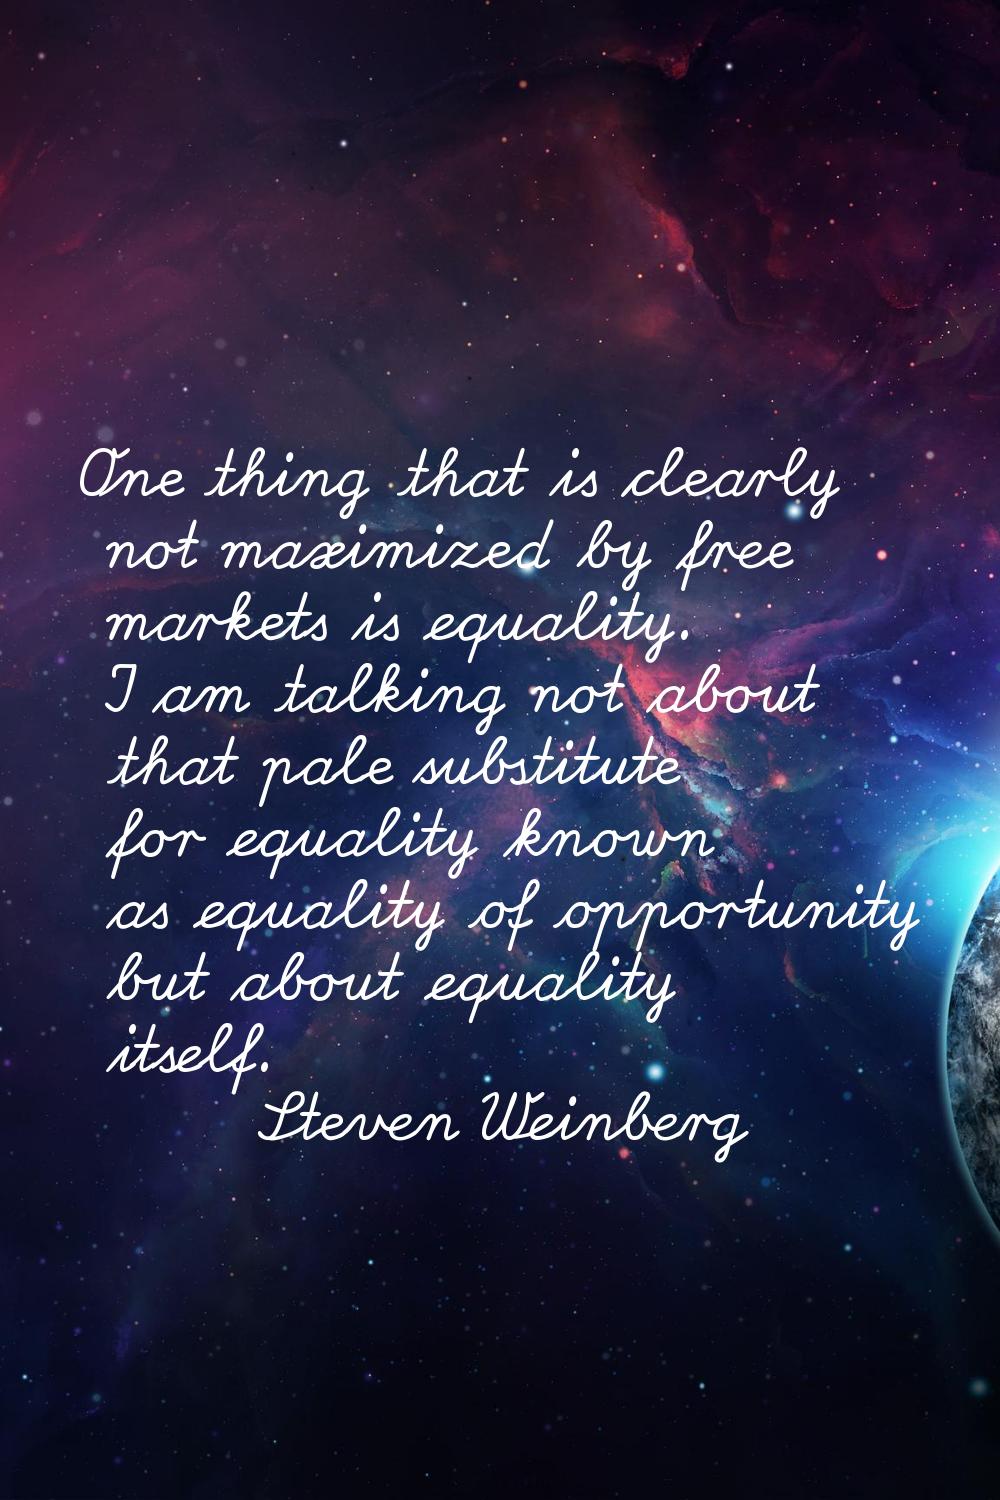 One thing that is clearly not maximized by free markets is equality. I am talking not about that pa